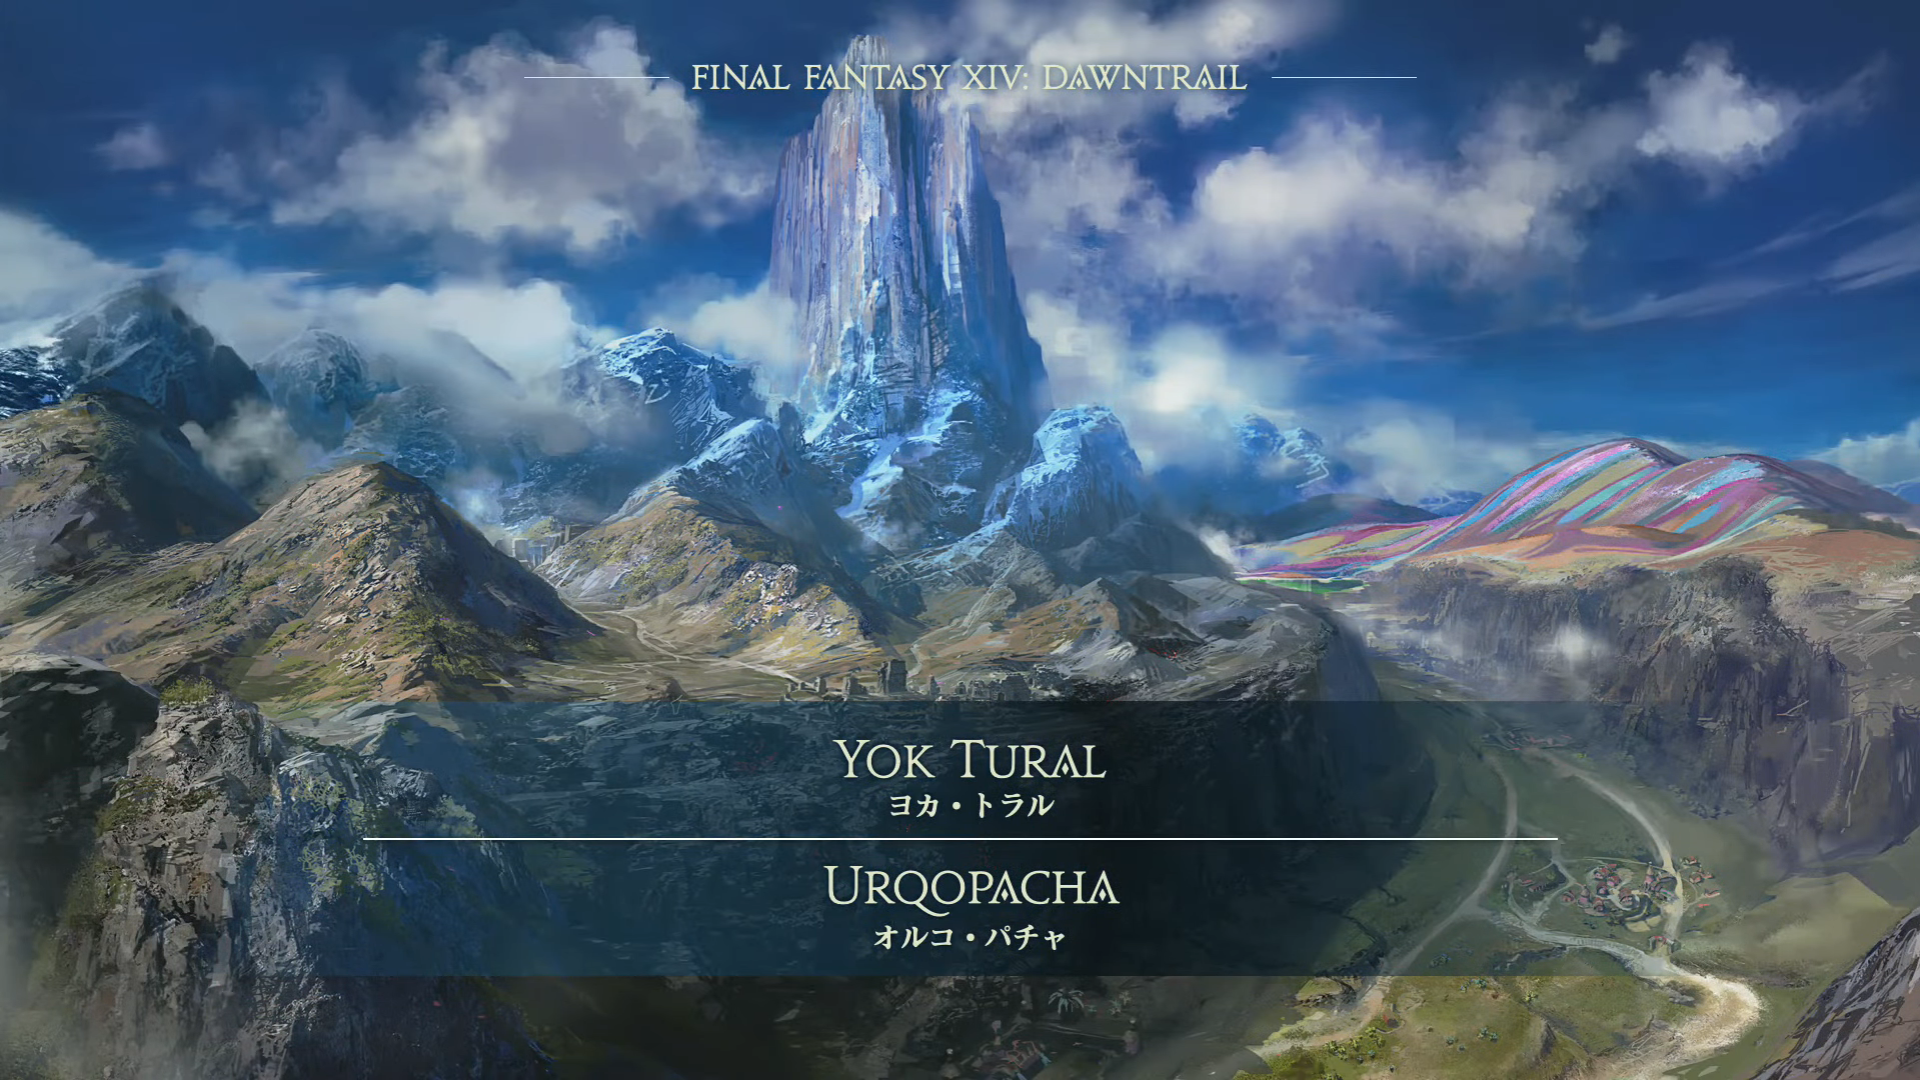 Final Fantasy XIV Dawntrail Reveals Details About New Area, Tural